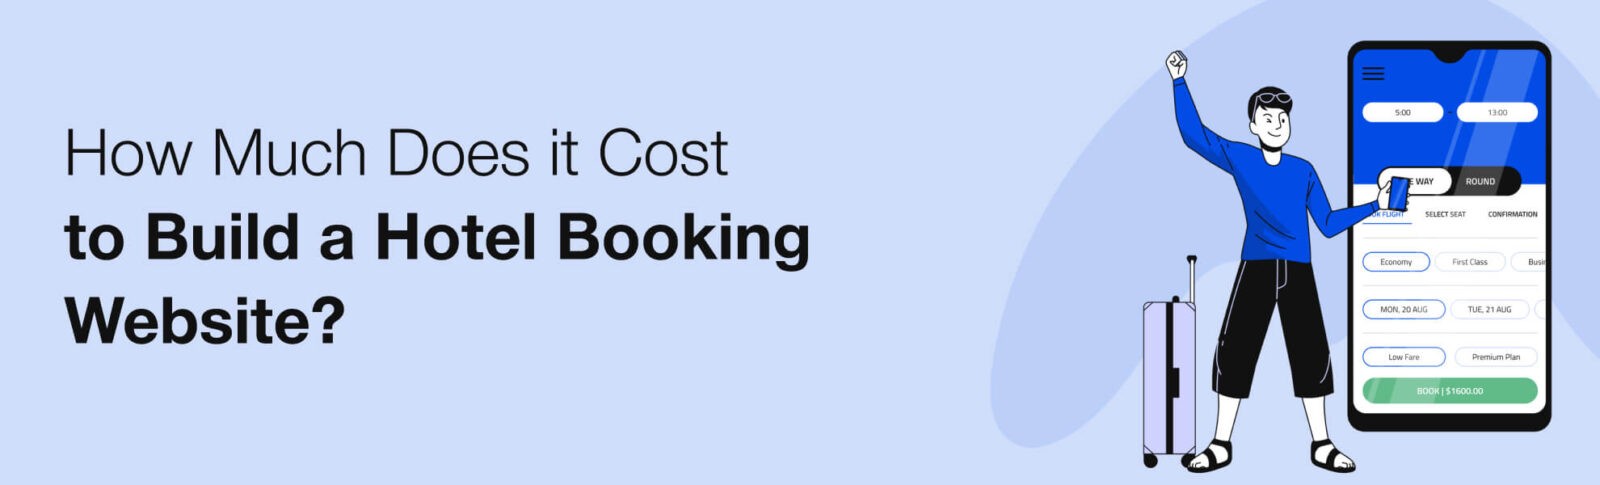 How Much Does It Cost to Build a Hotel Booking Website?